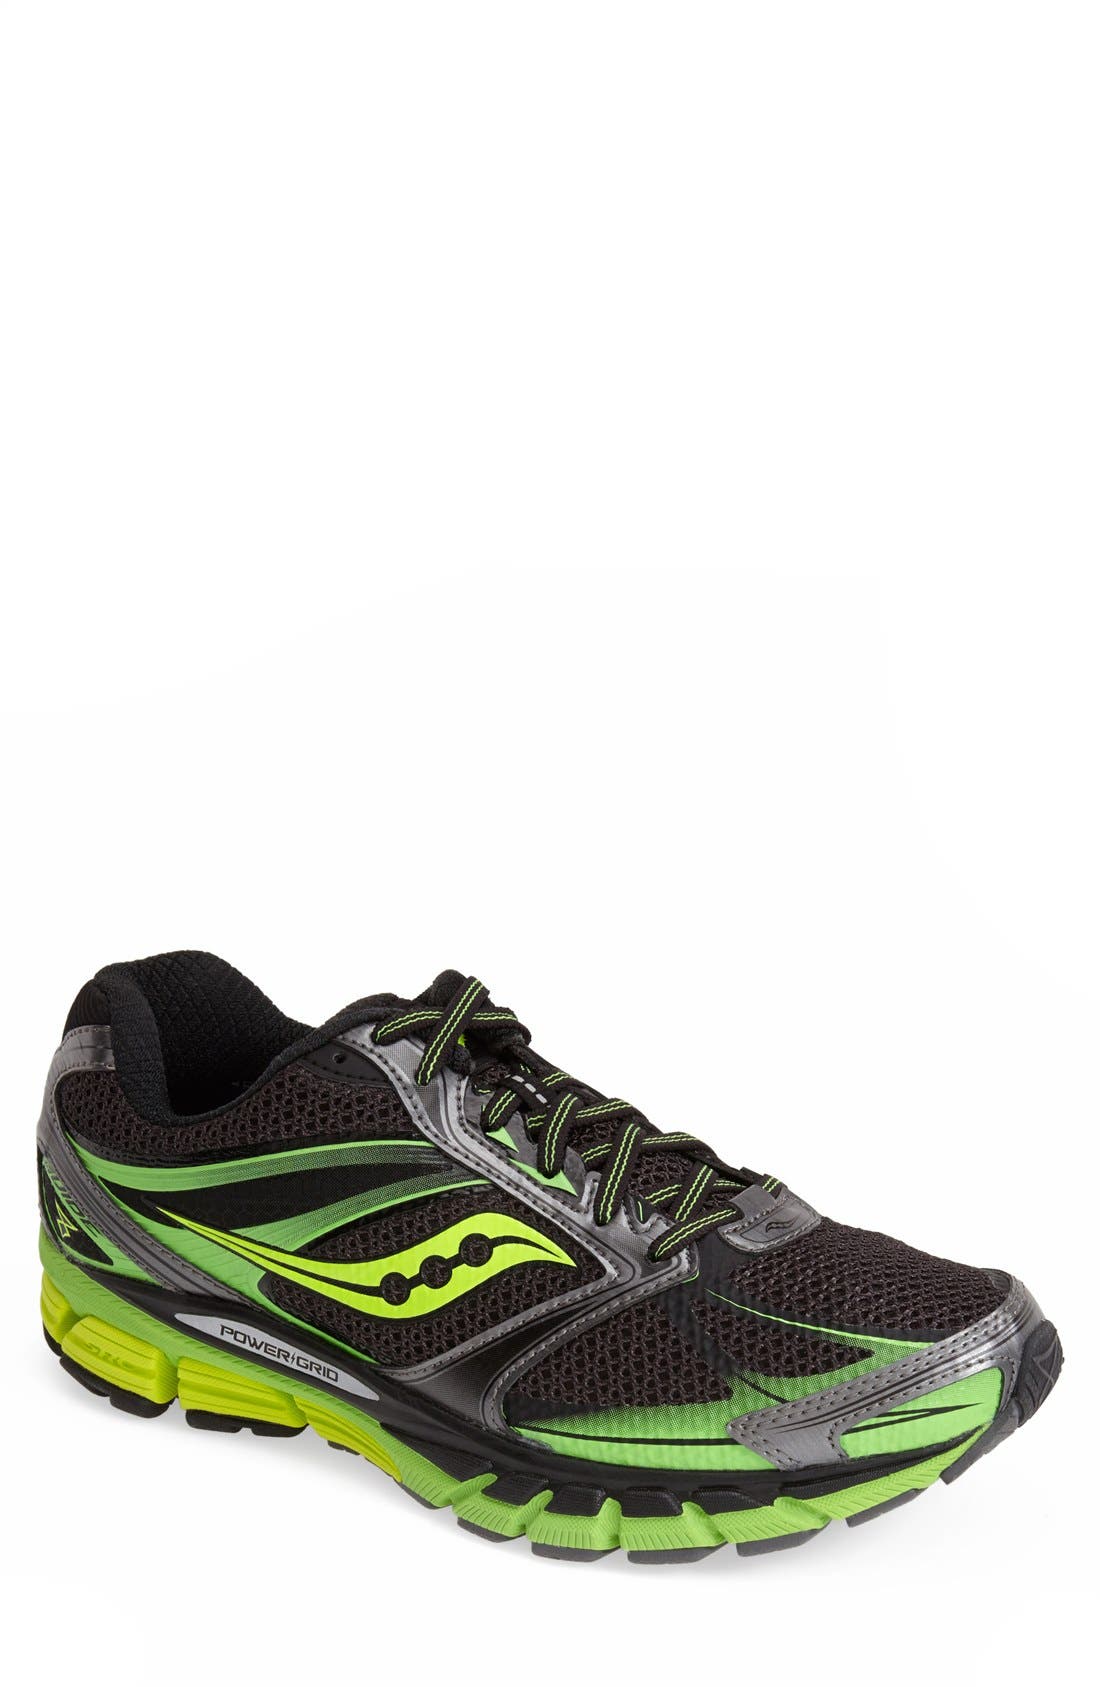 saucony guide 8 running shoes mens